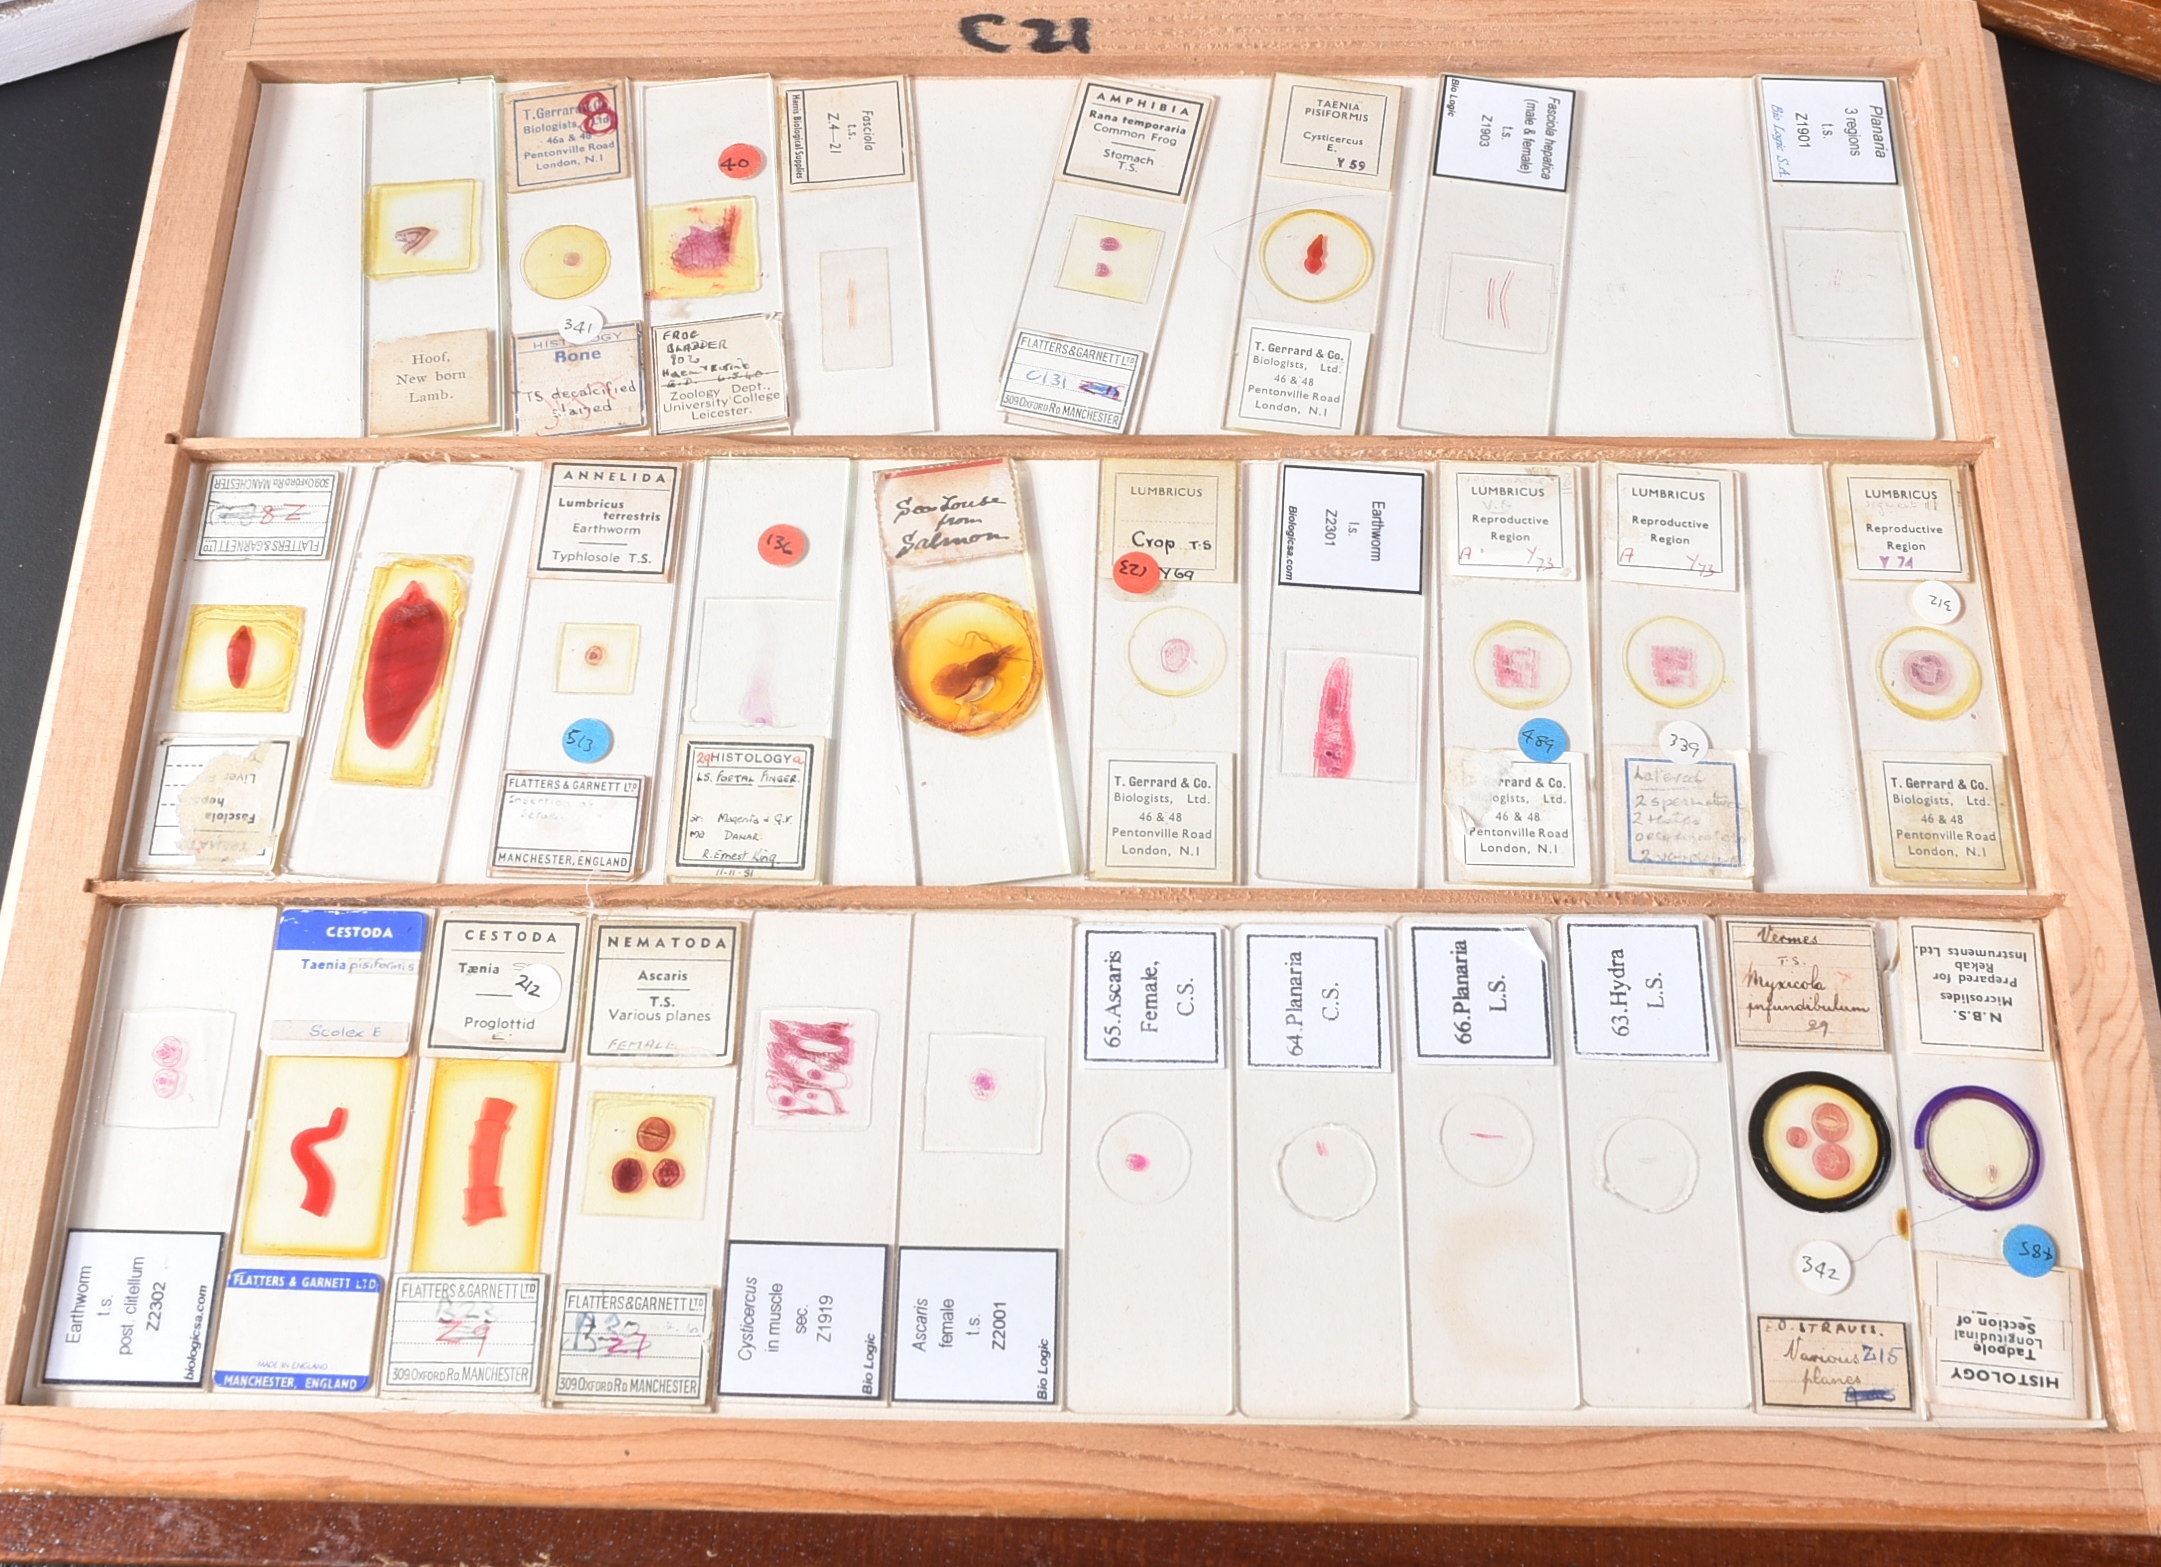 LARGE & EXTENSIVE BECK CABINET MICROSCOPE SLIDE COLLECTION - Image 37 of 101